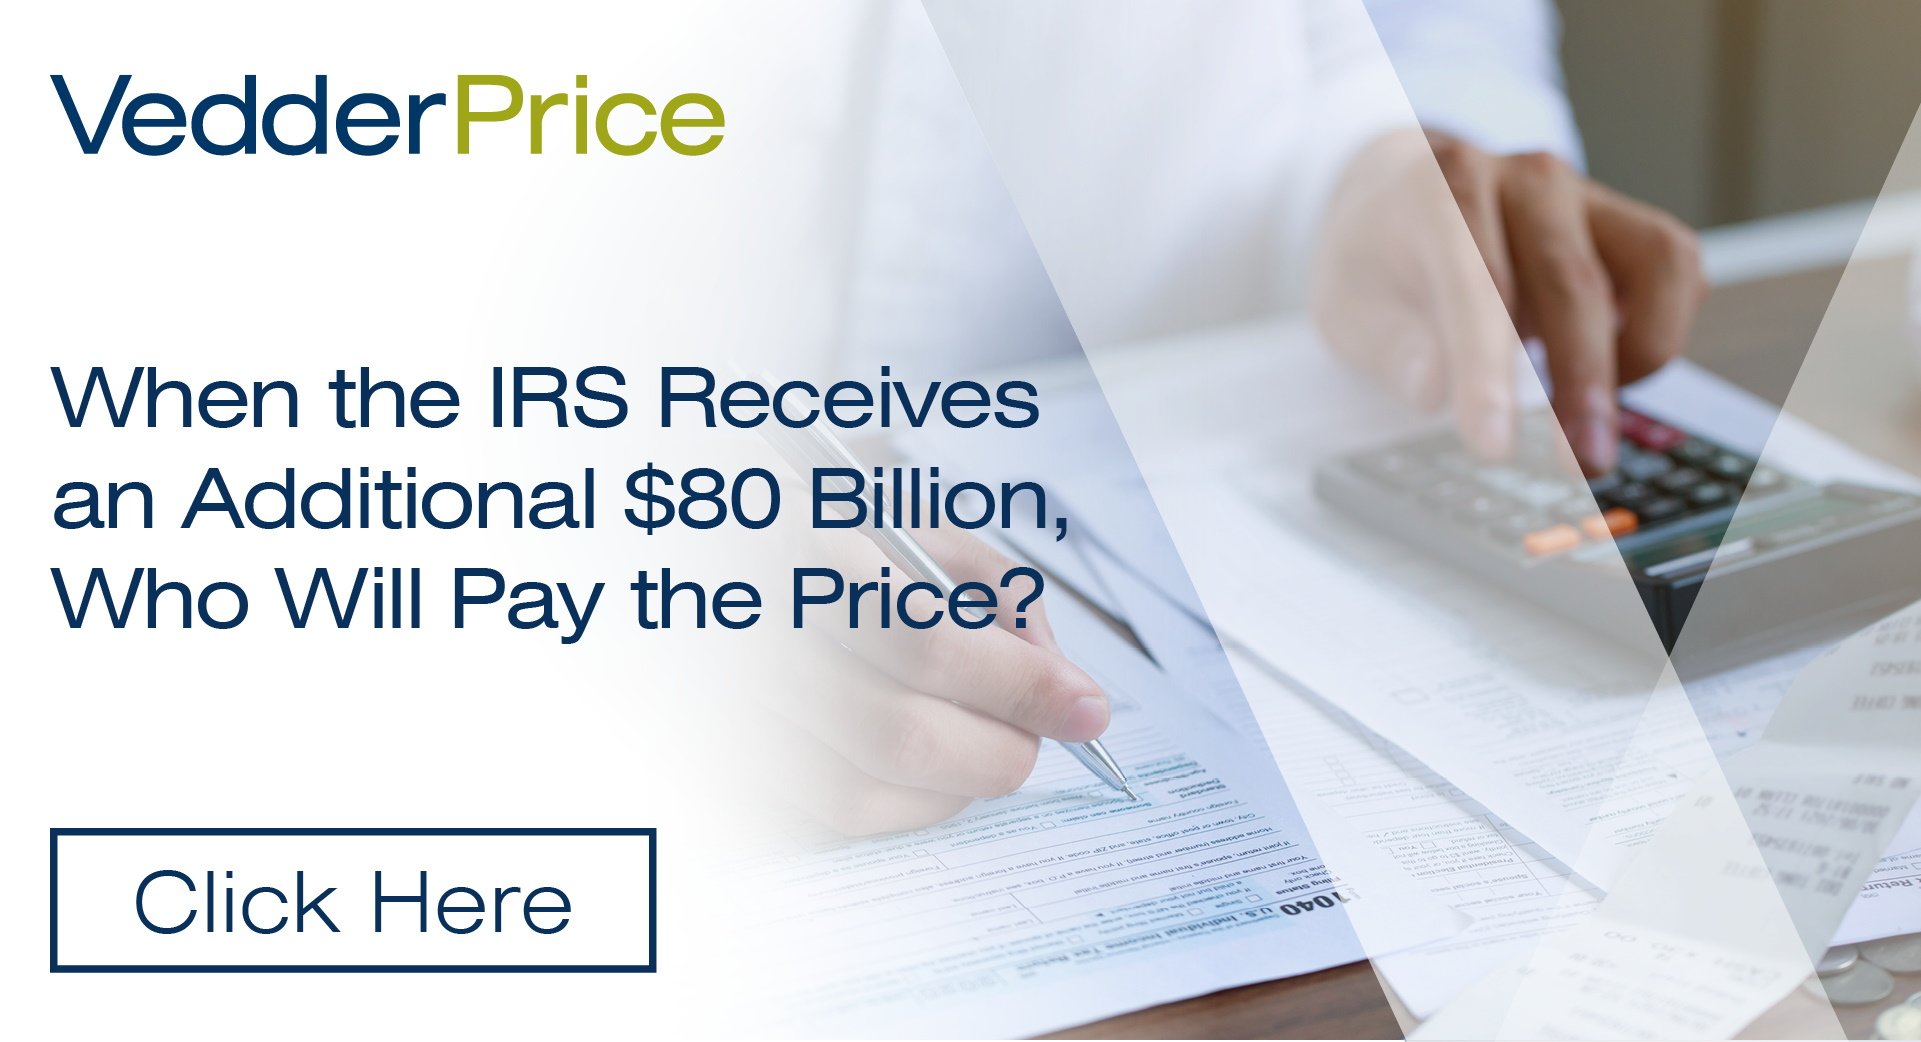 When the IRS Receives an Additional 80 Billion, Who Will Pay the Price